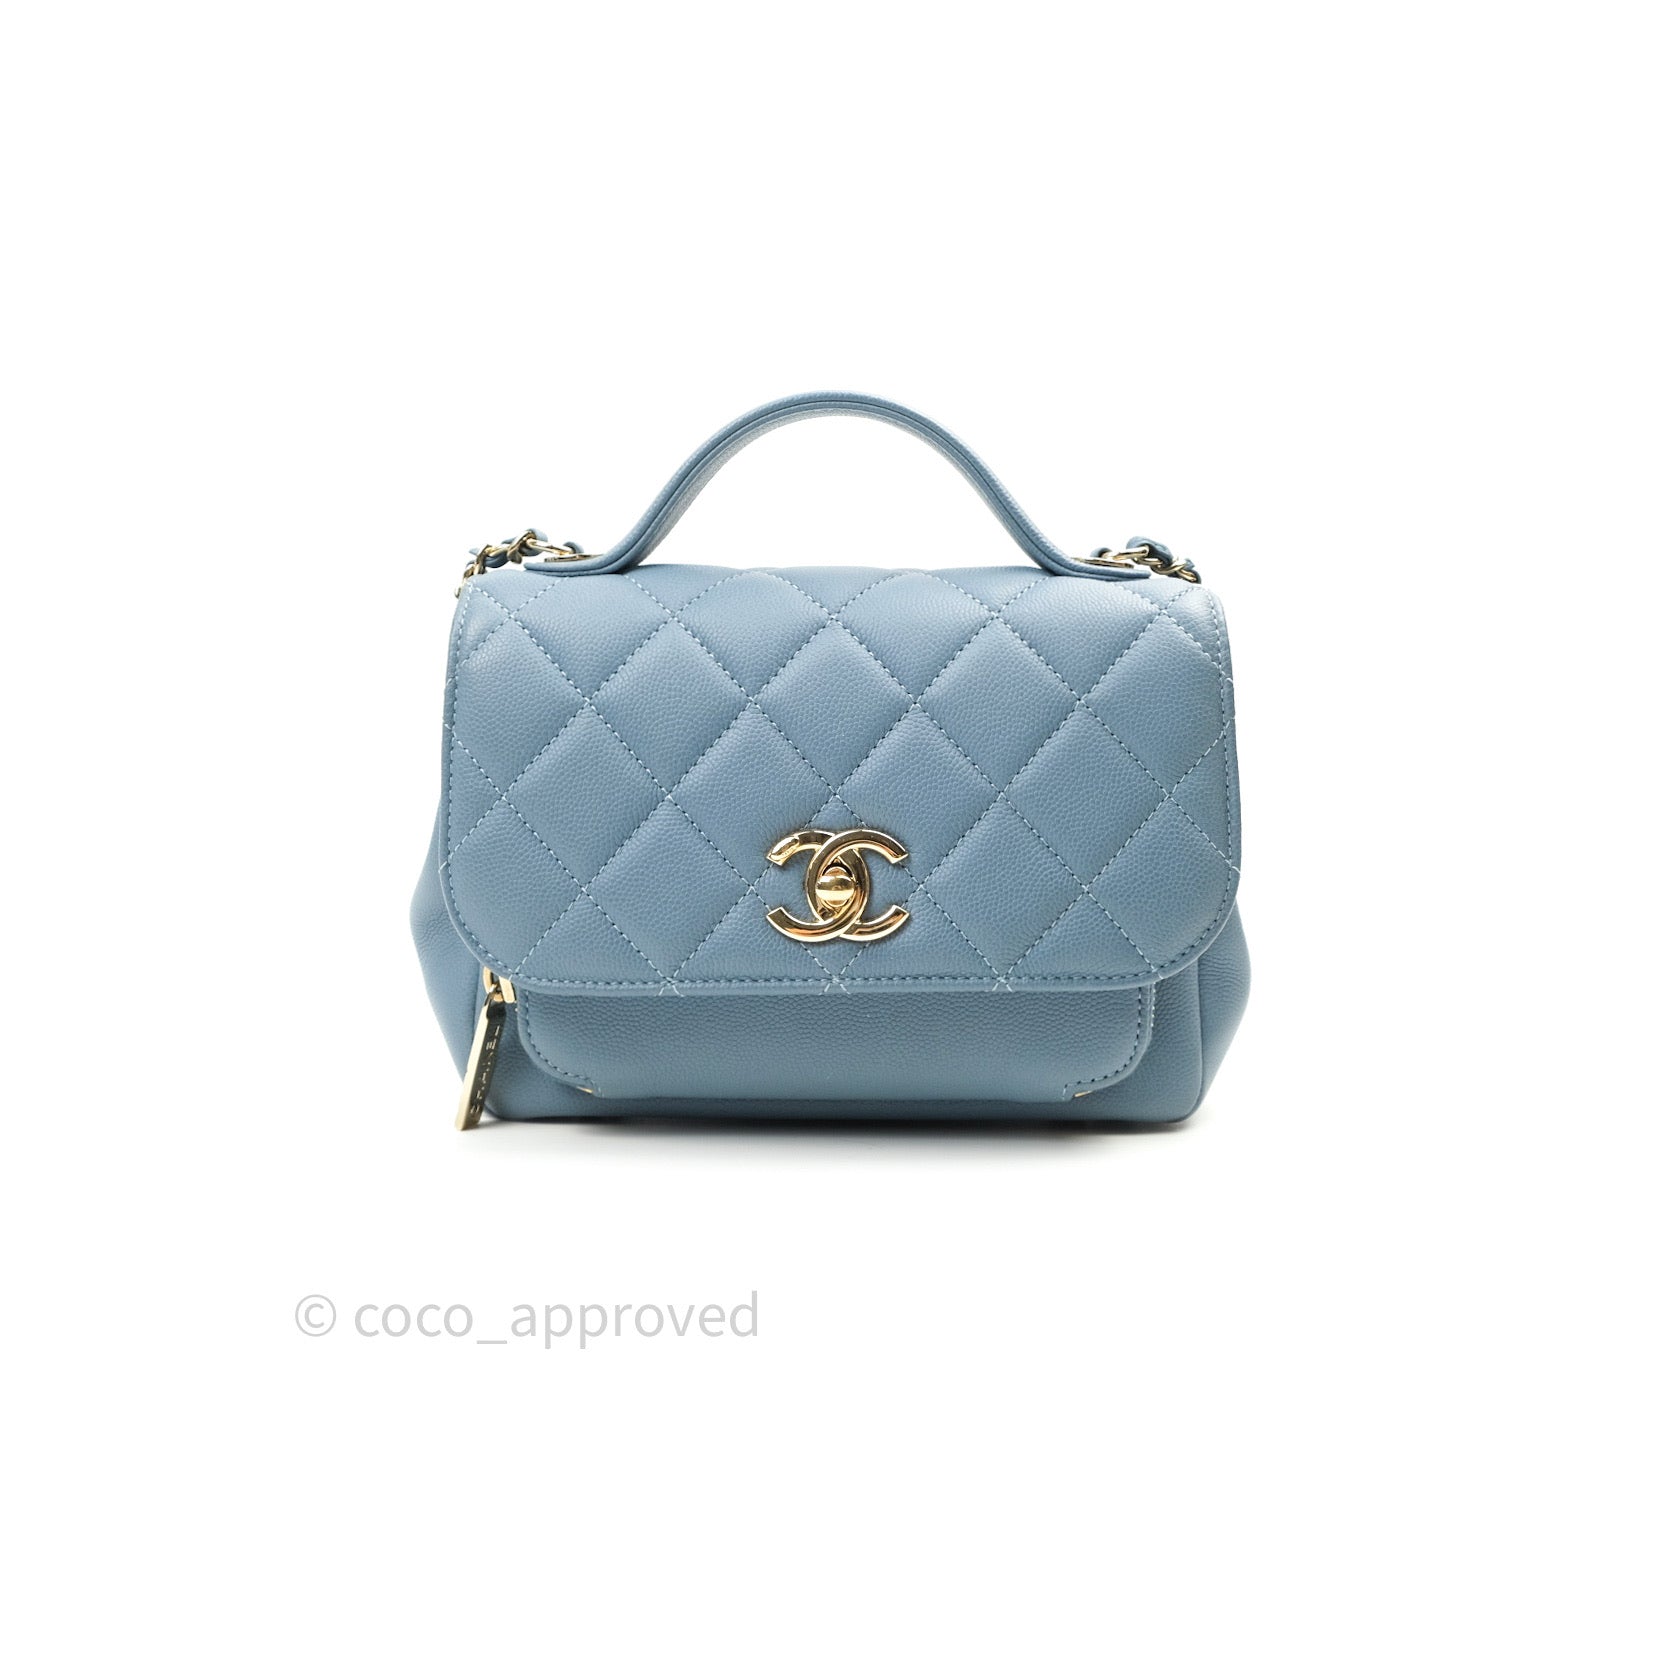 Chanel Light Blue Caviar Leather Small Business Affinity Flap Shoulder Bag  Chanel